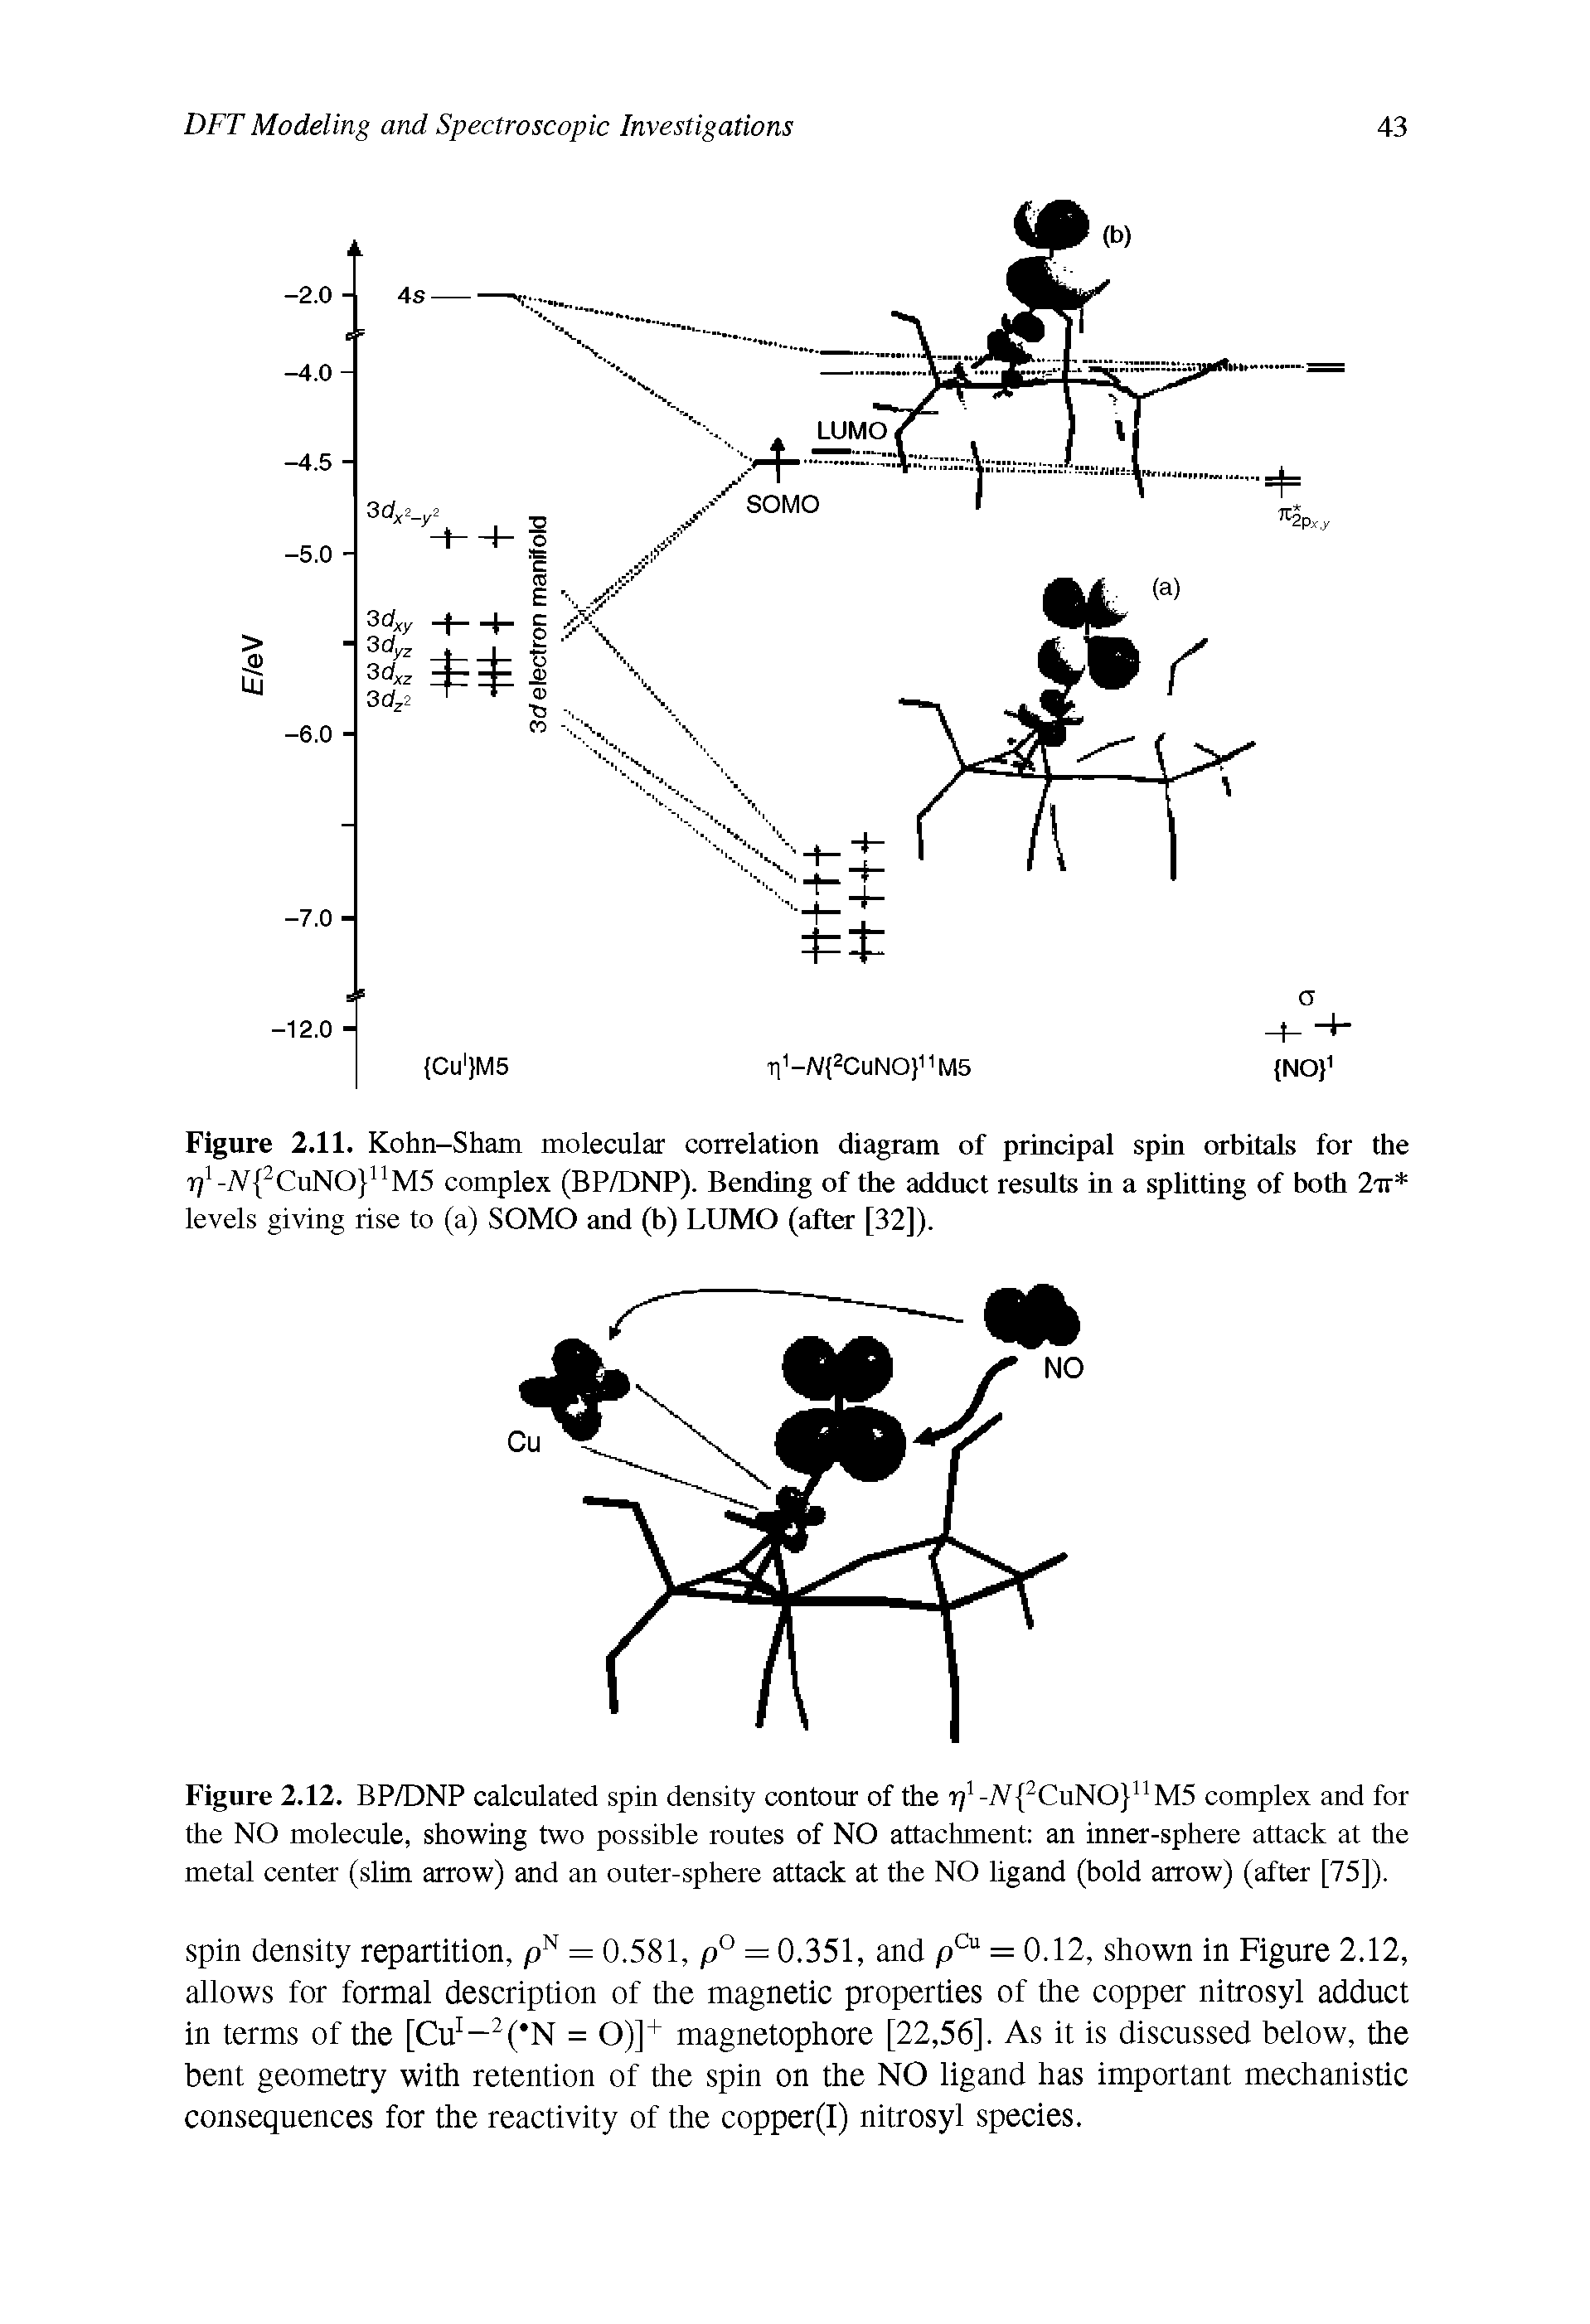 Figure 2.11. Kohn-Sham molecular correlation diagram of principal spin orbitals for the 7] -/V 2CuN( ) 11M5 complex (BP/DNP). Bending of the adduct results in a splitting of both 2tt levels giving rise to (a) SOMO and (b) LUMO (after [32]).